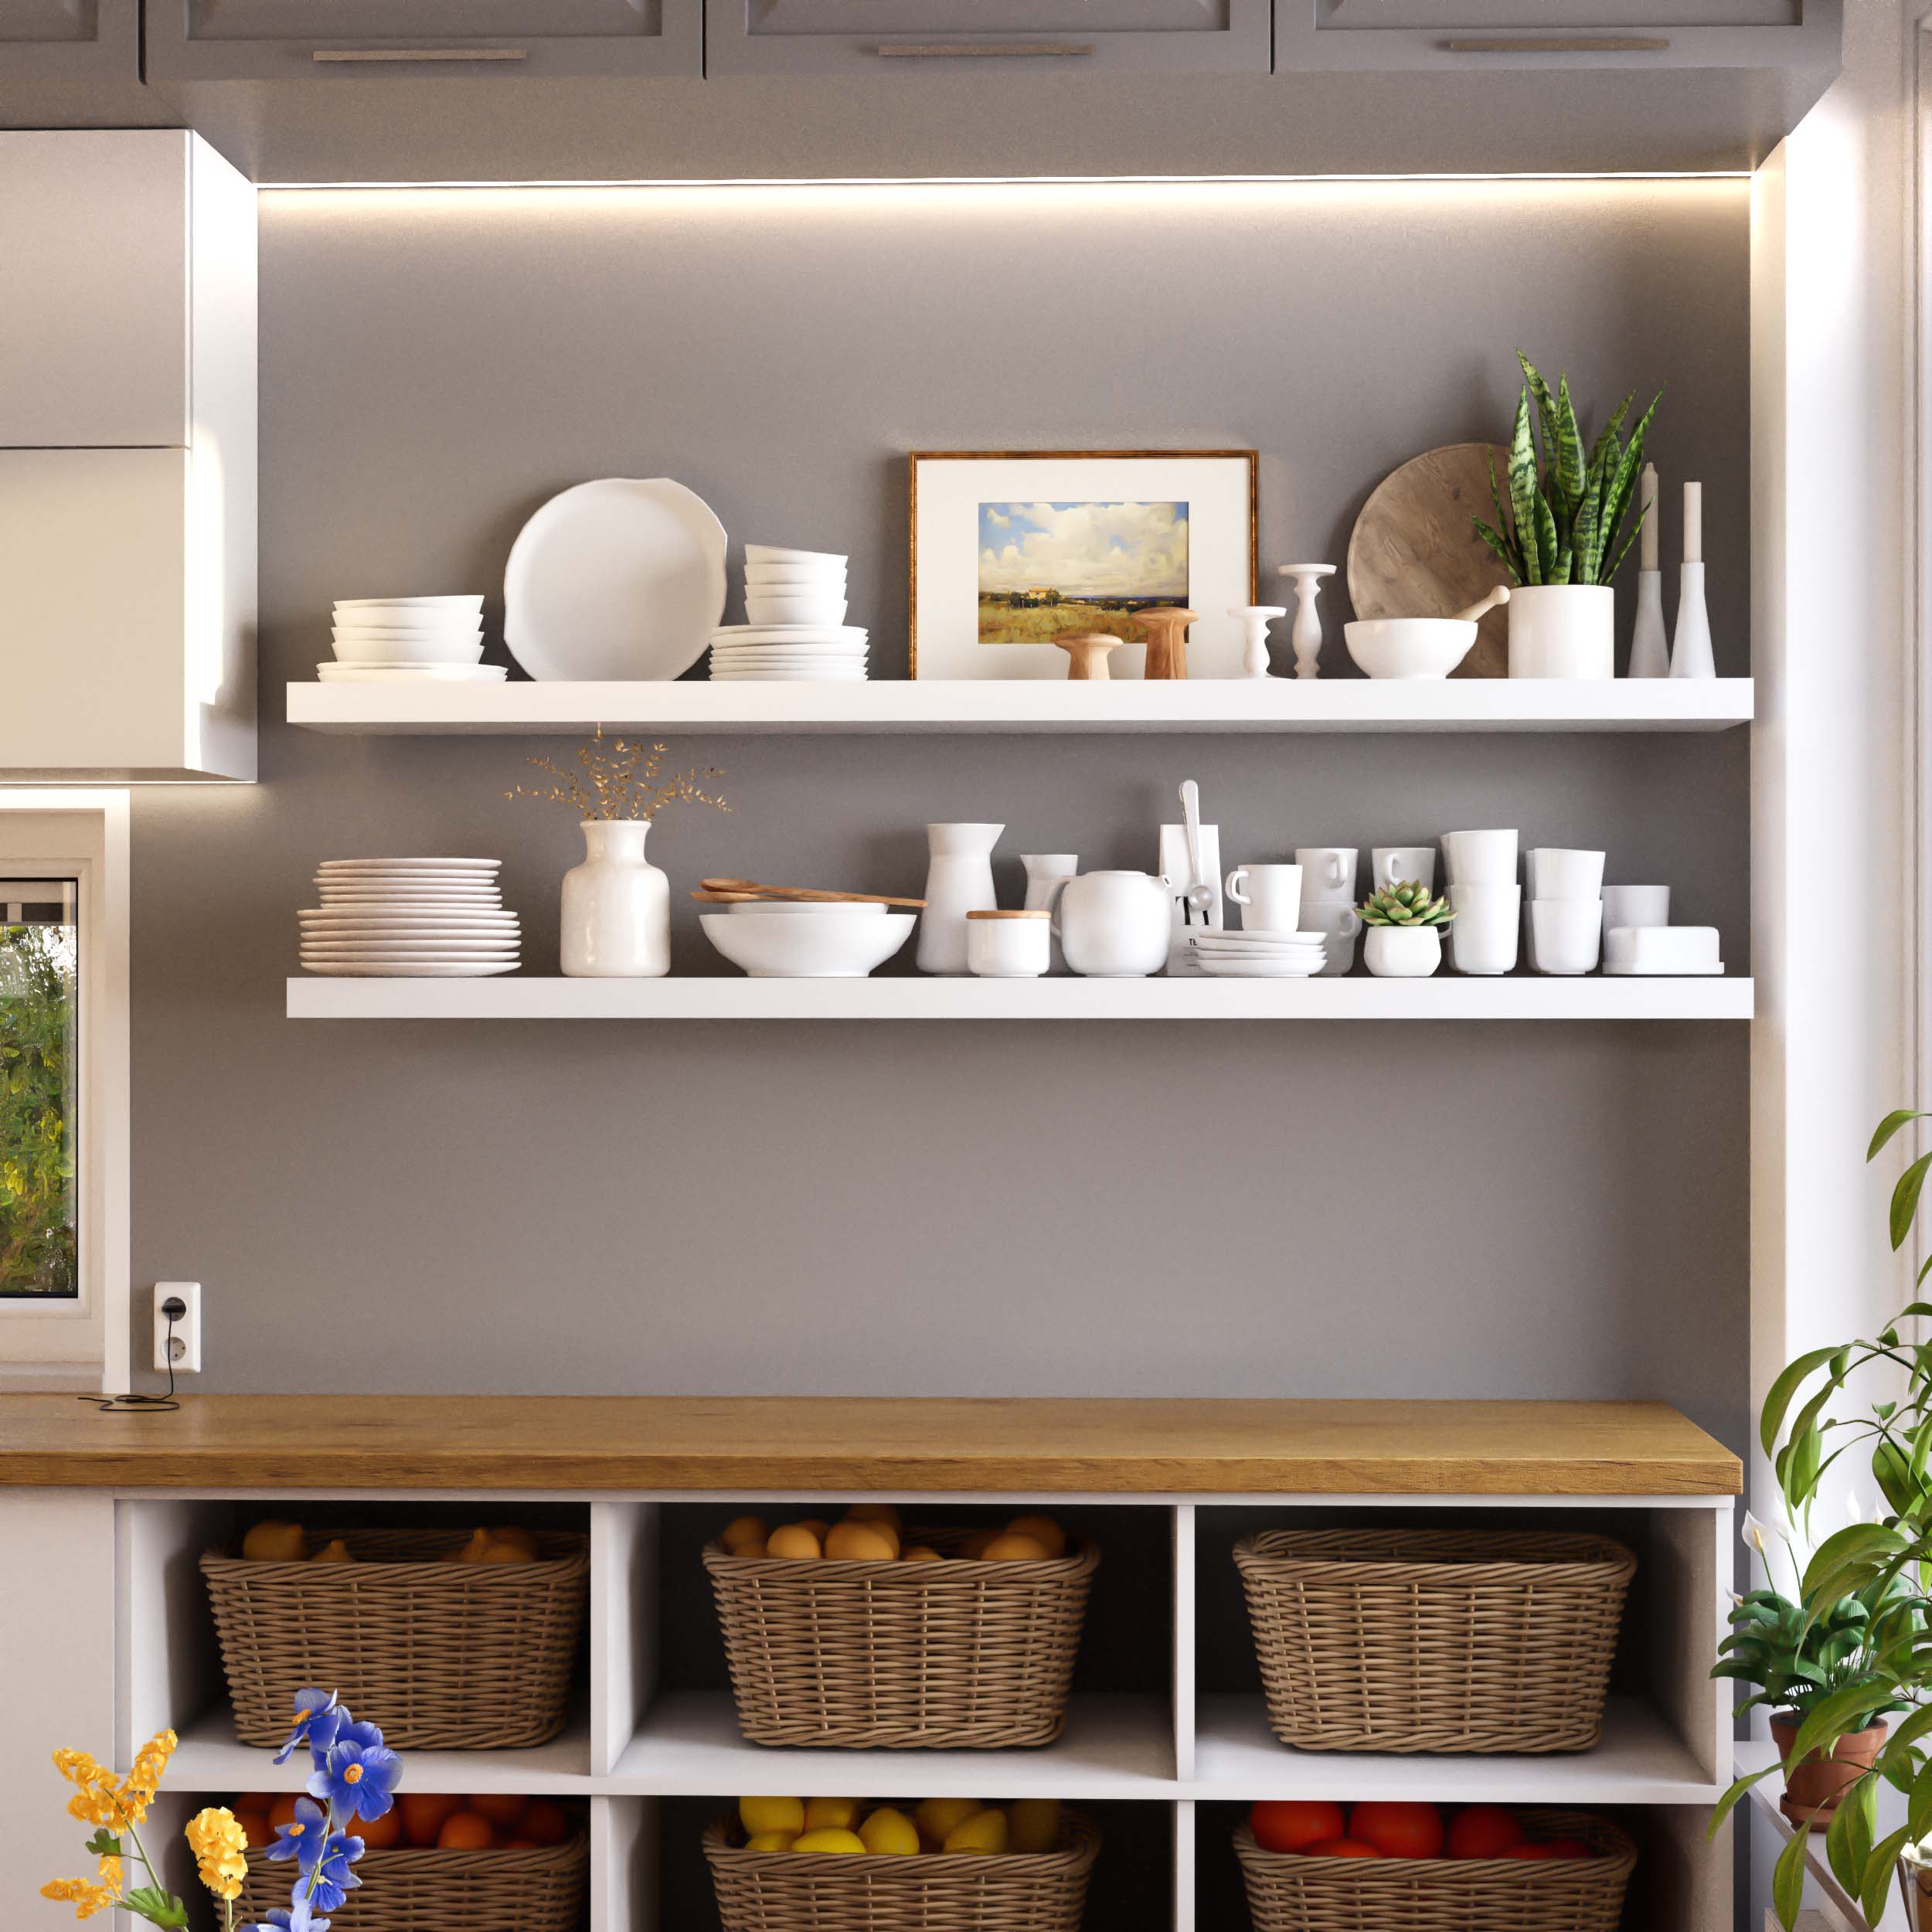 Elegantly styled white floating shelves in a kitchen displaying plates, bowls, and other dishware.